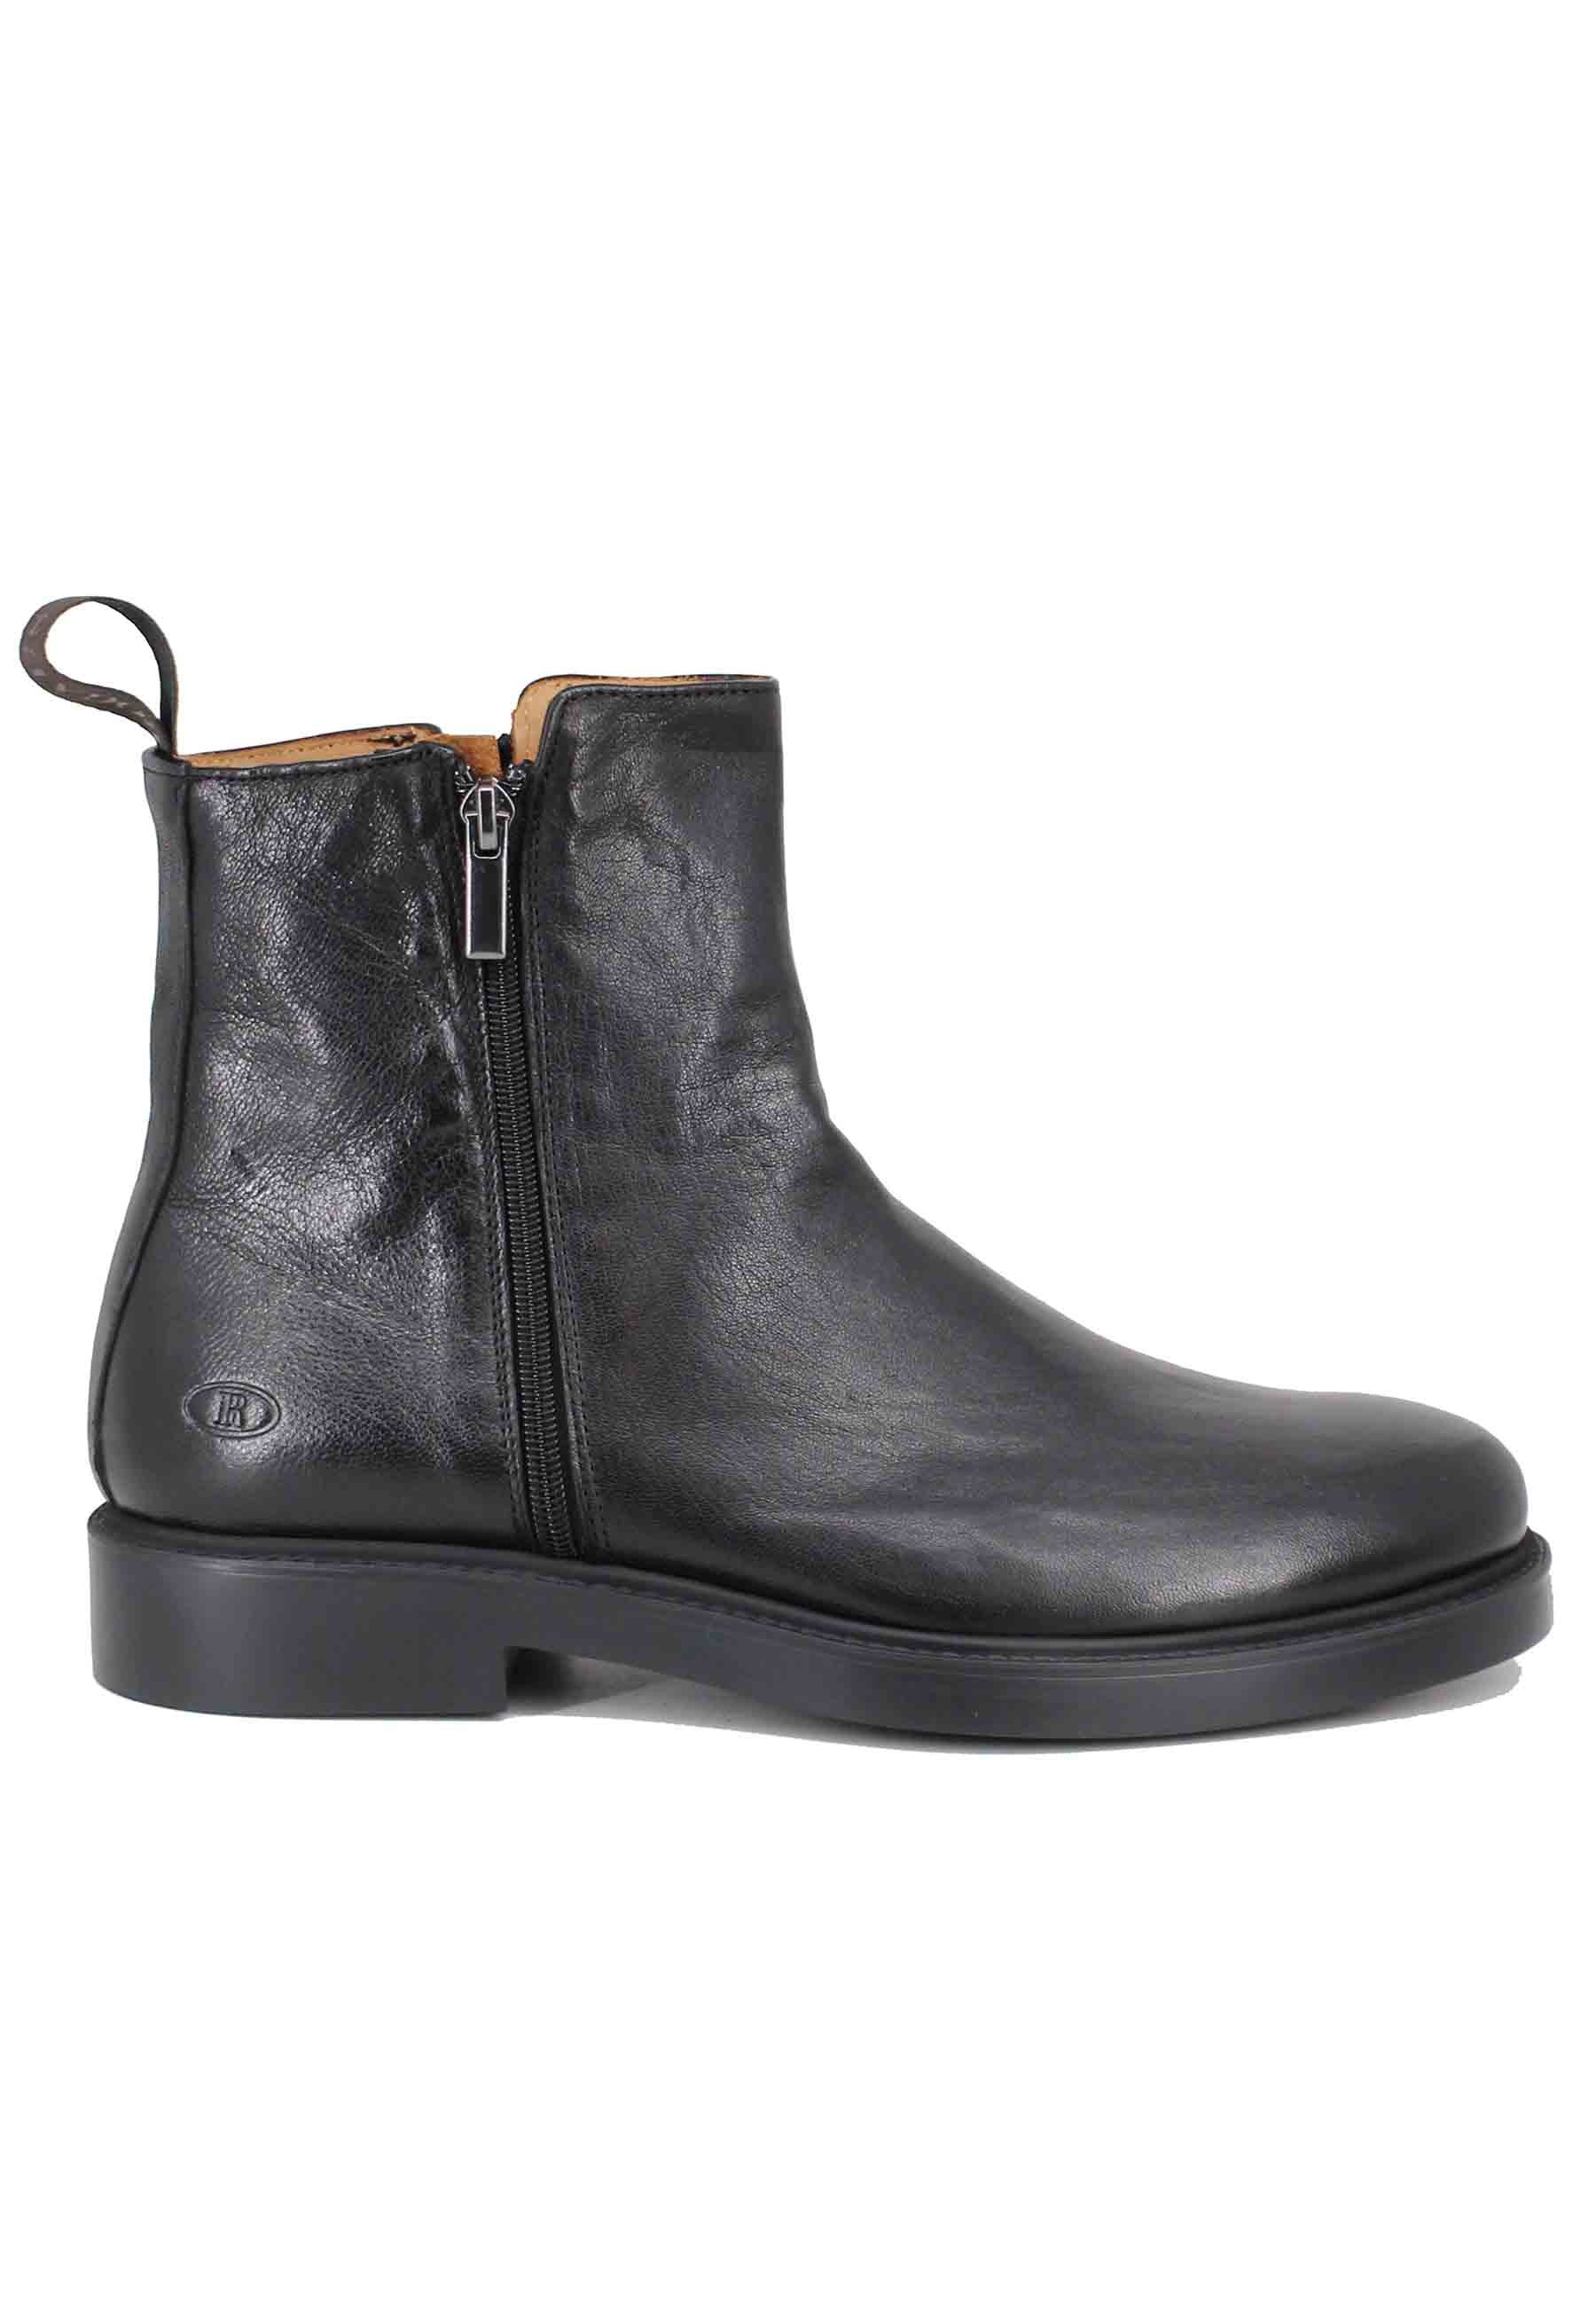 Men's black leather ankle boots with rubber sole